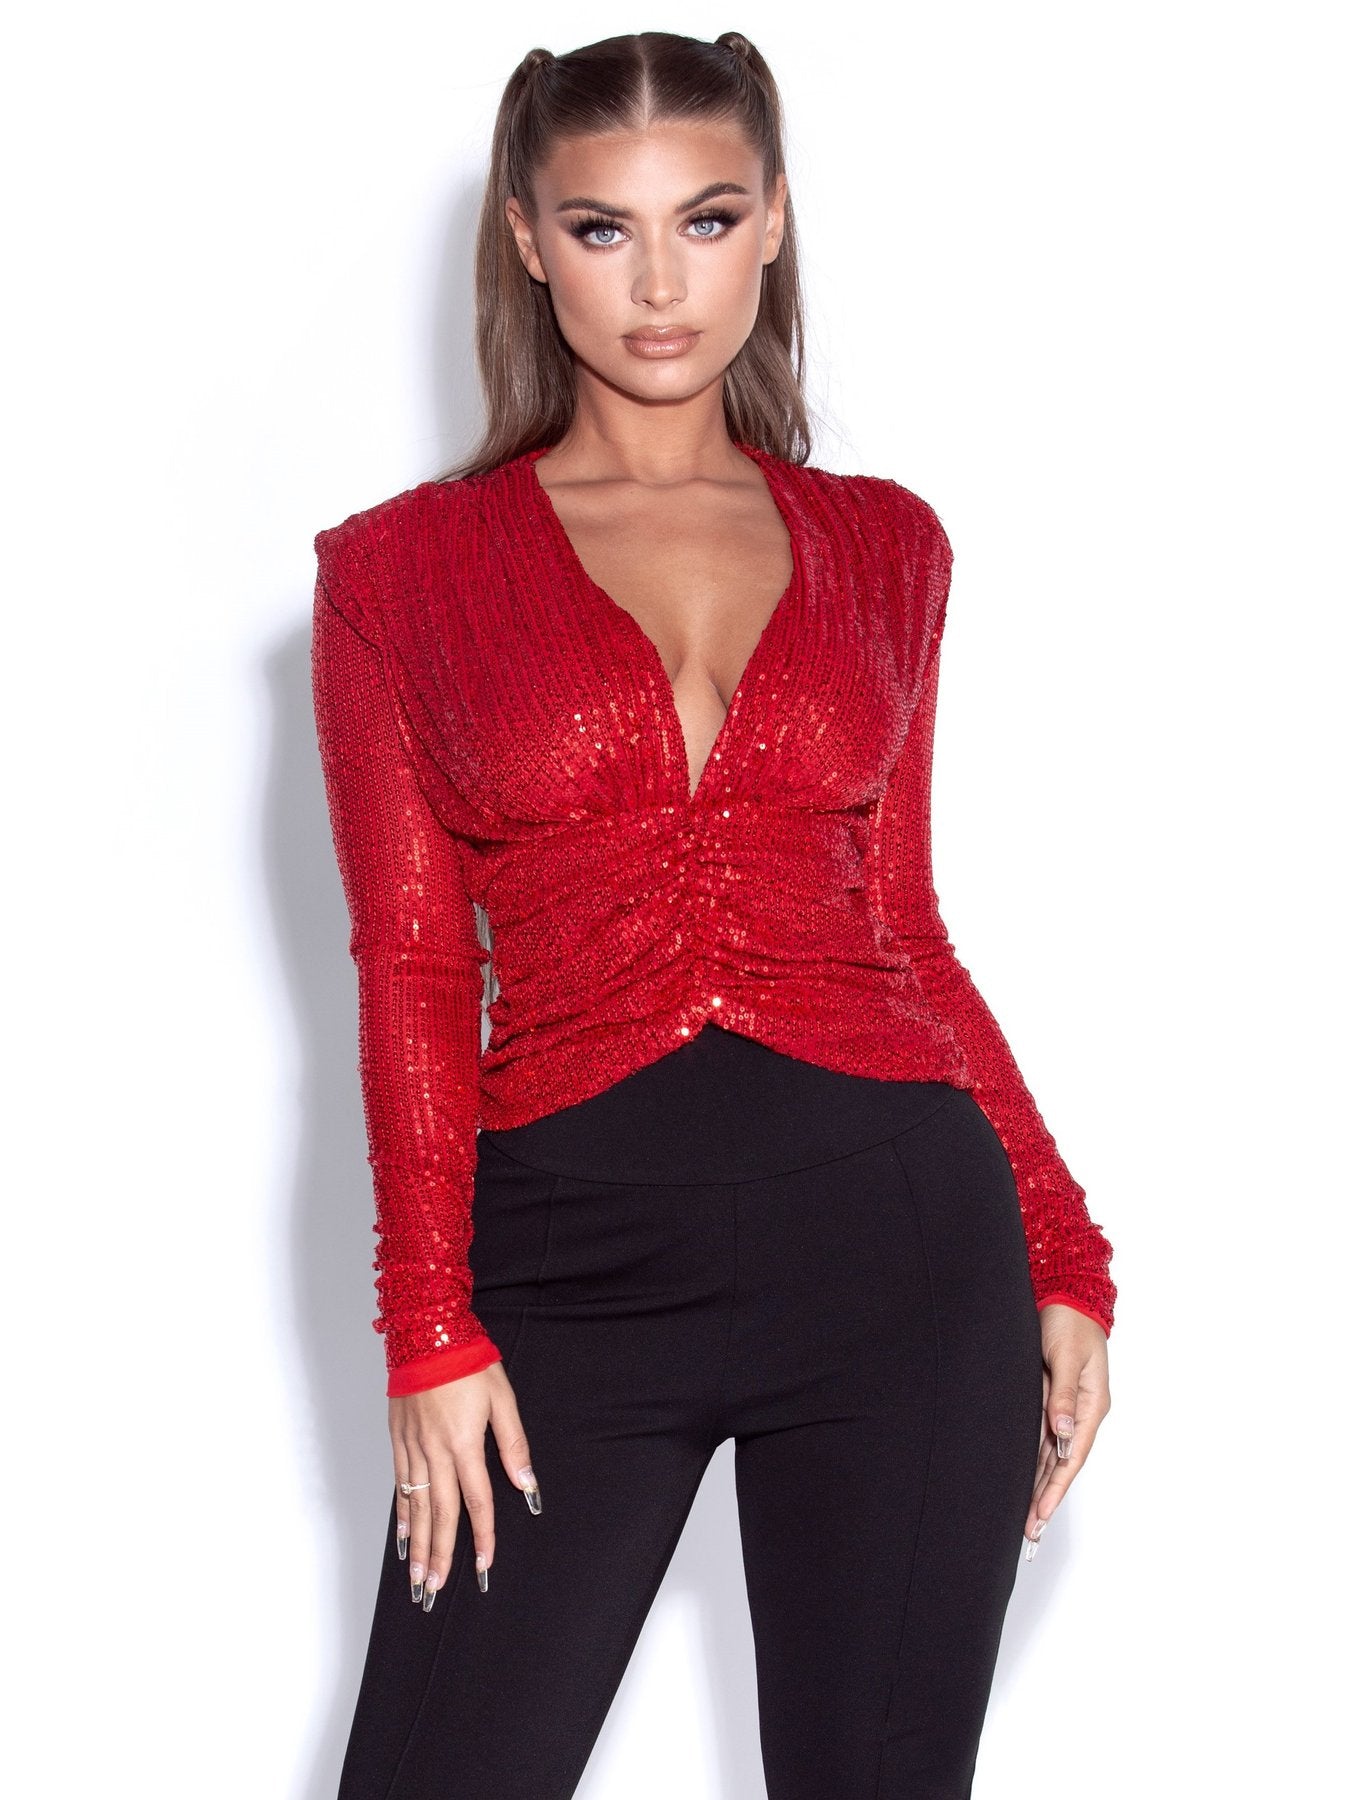 Tate Red Sequined Long Sleeve Deep V Top